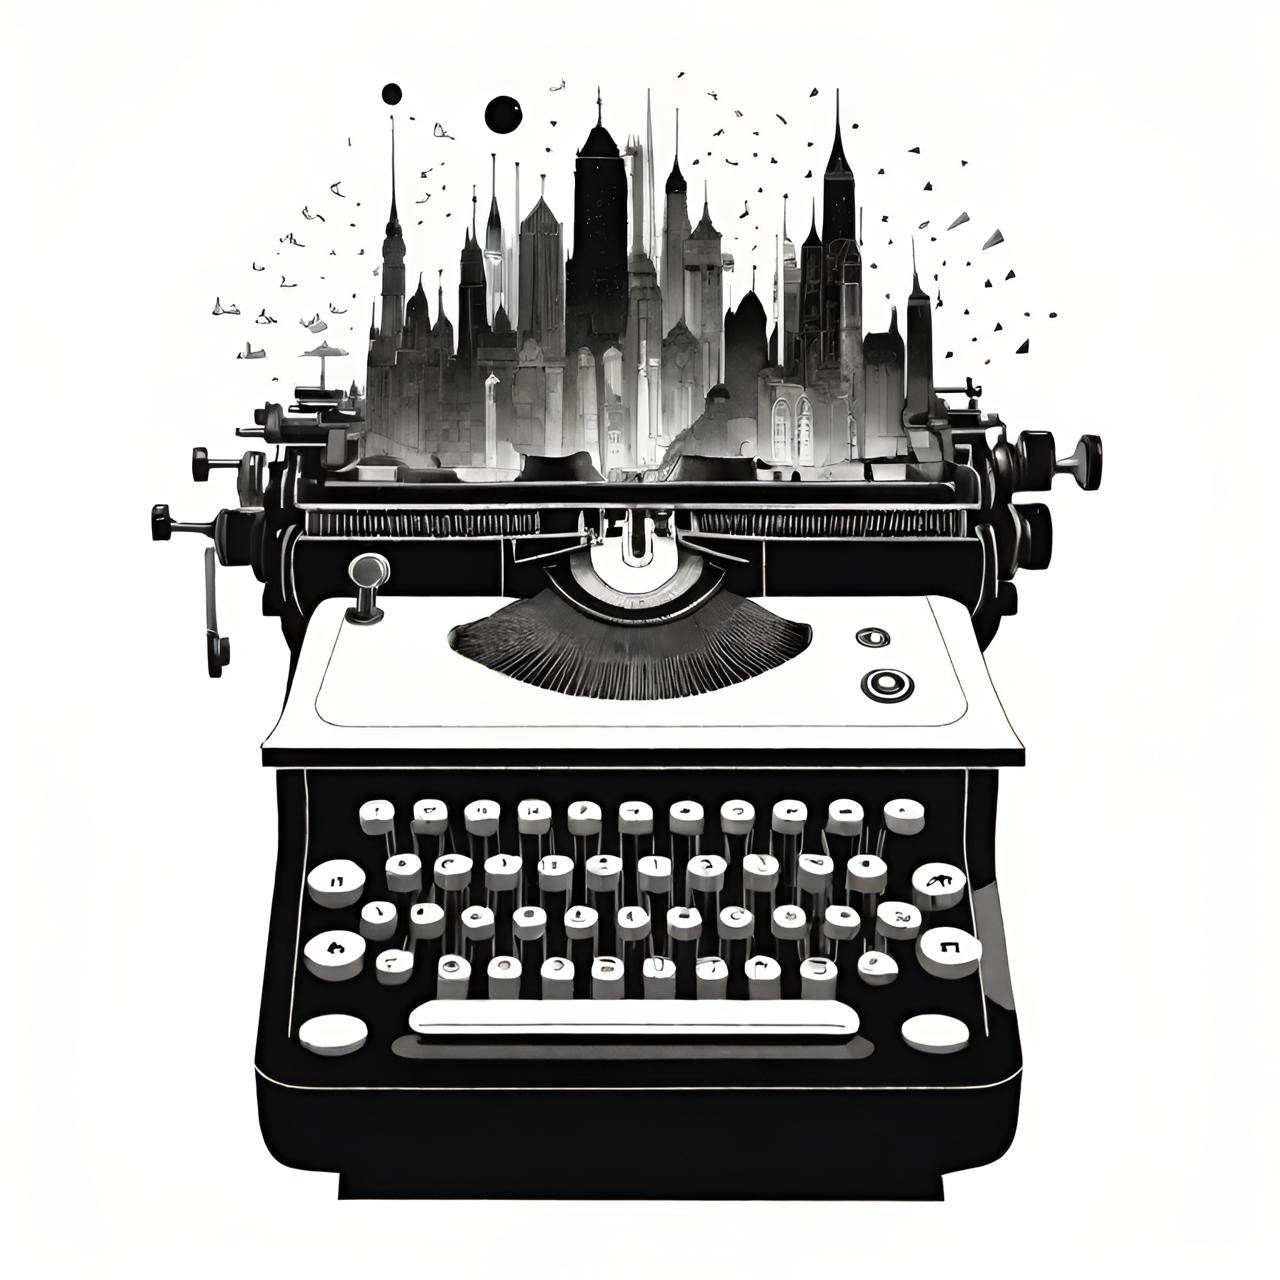 A black and white image of an old fashioned typewriter, but instead of words on paper, the typewriter is creating a sprawling city.